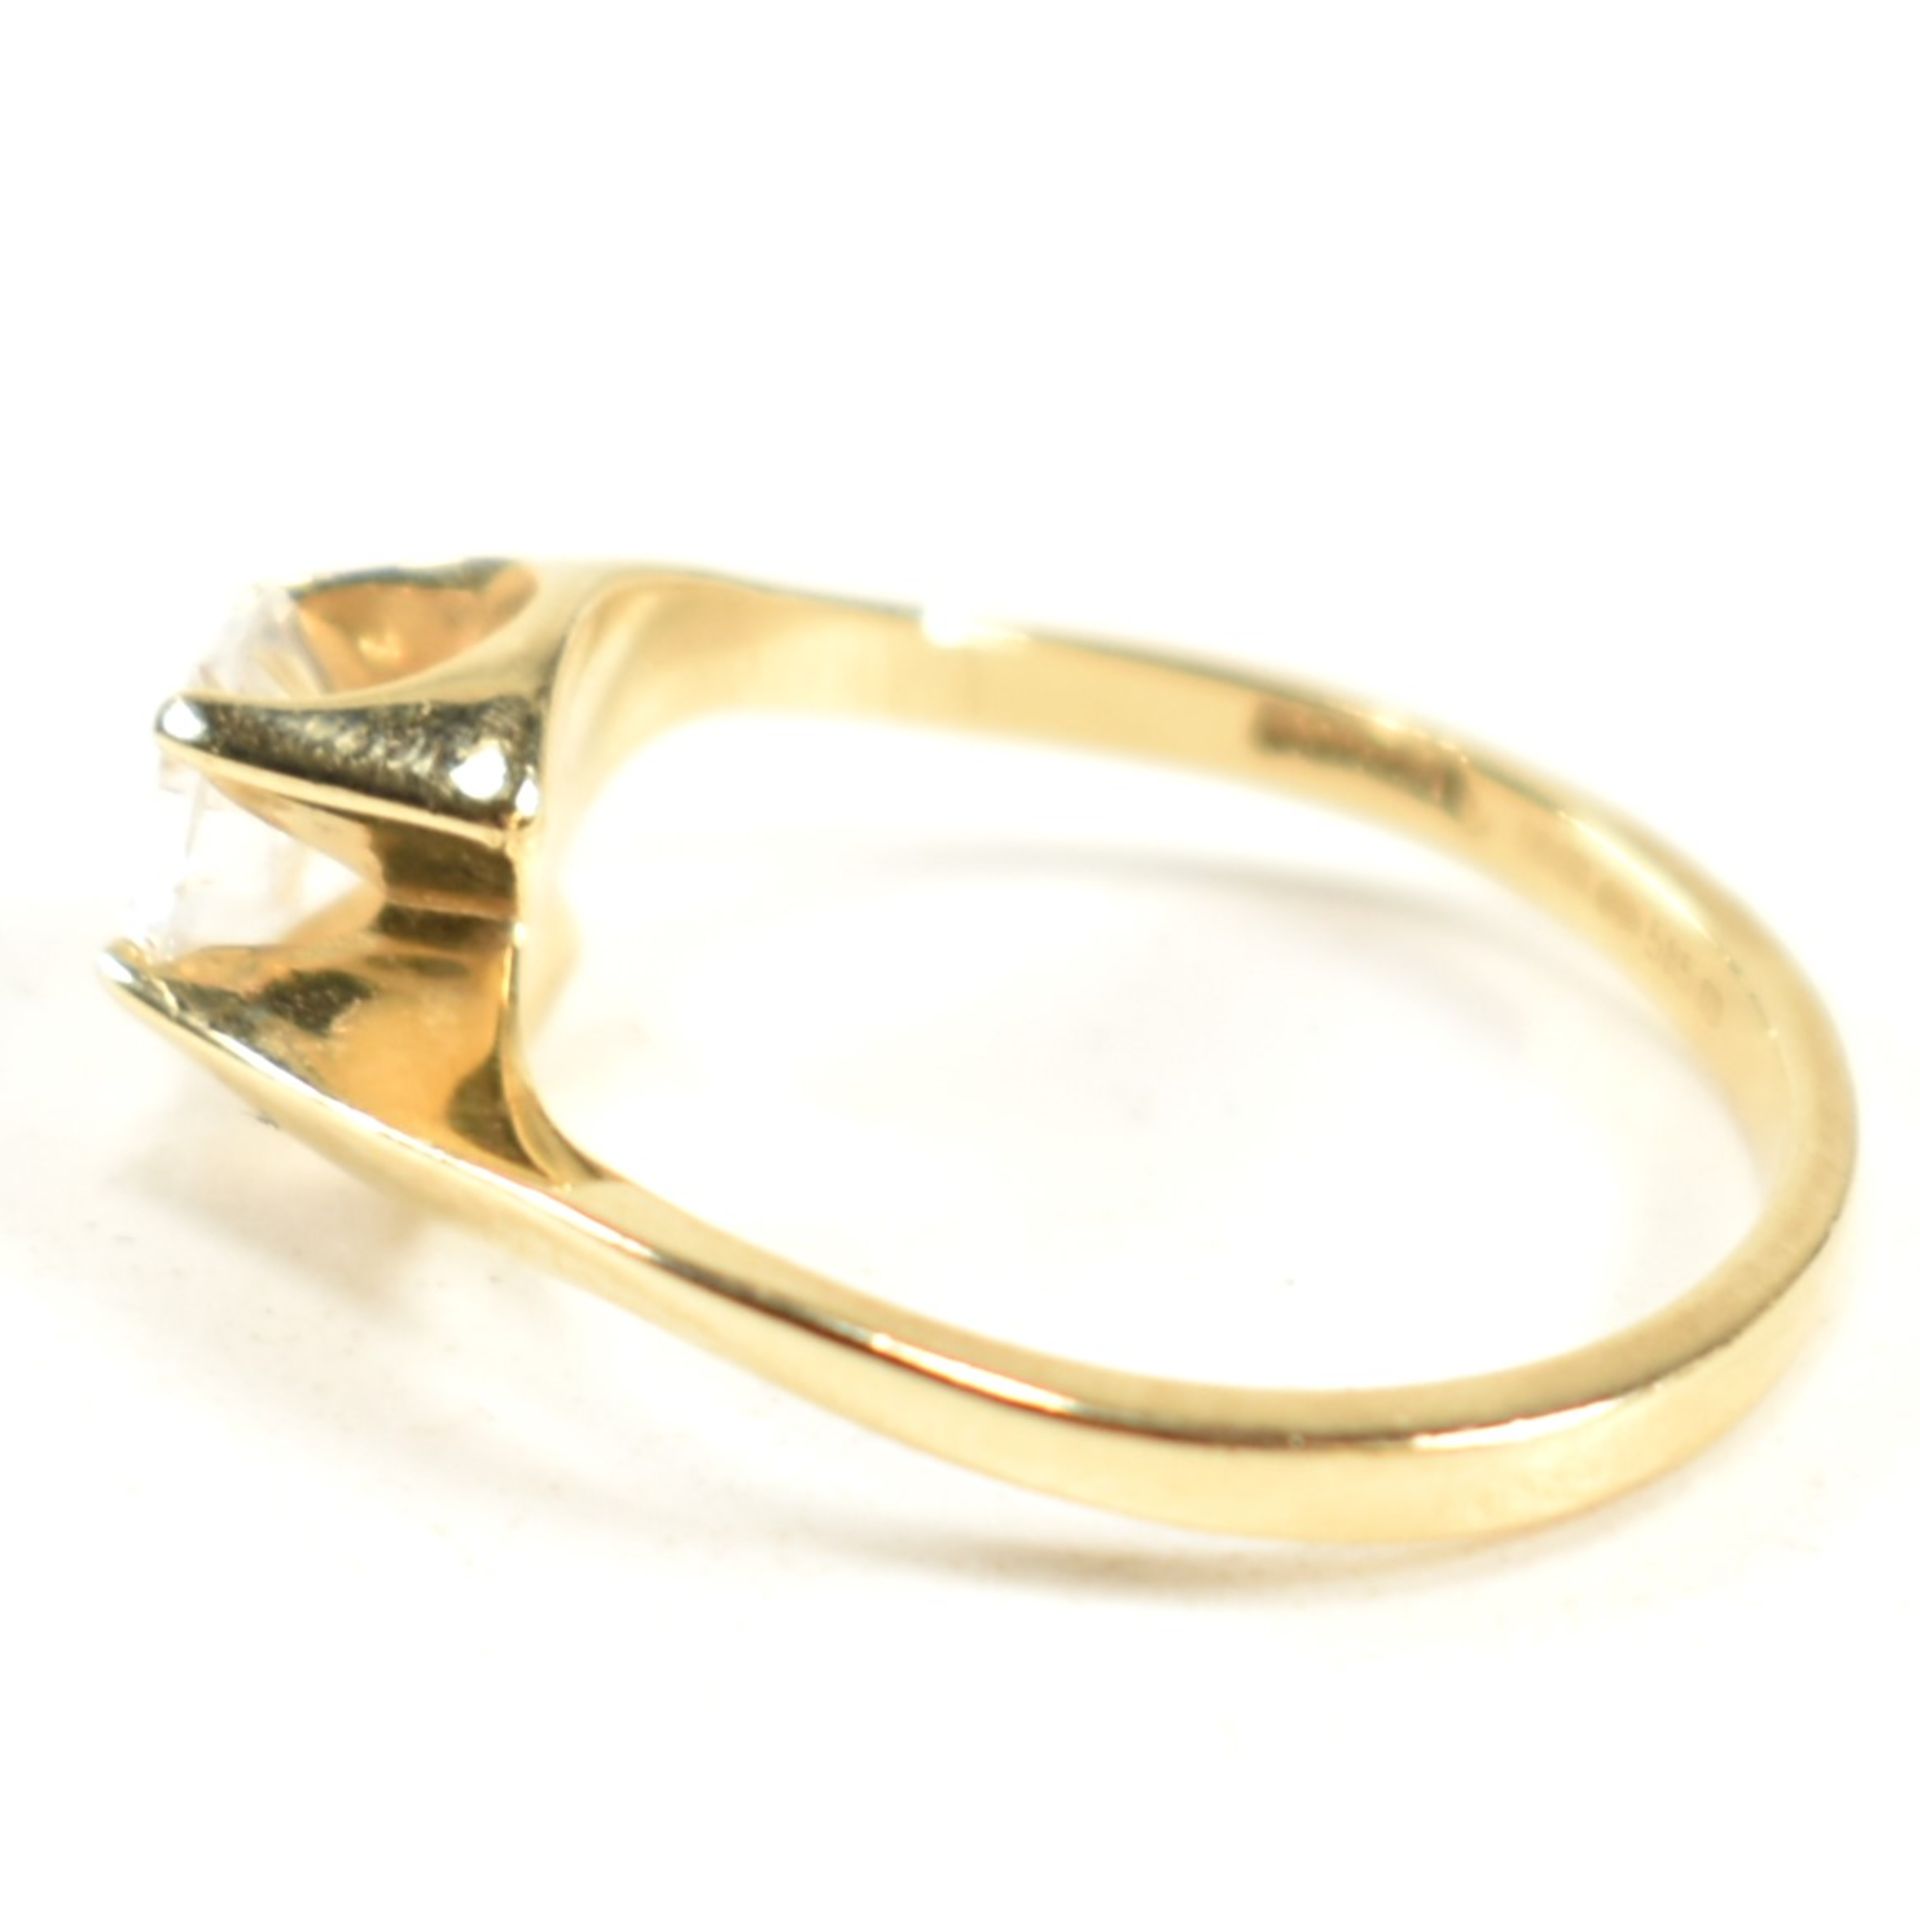 HALLMARKED 14CT GOLD & CZ CROSSOVER RING - Image 7 of 9